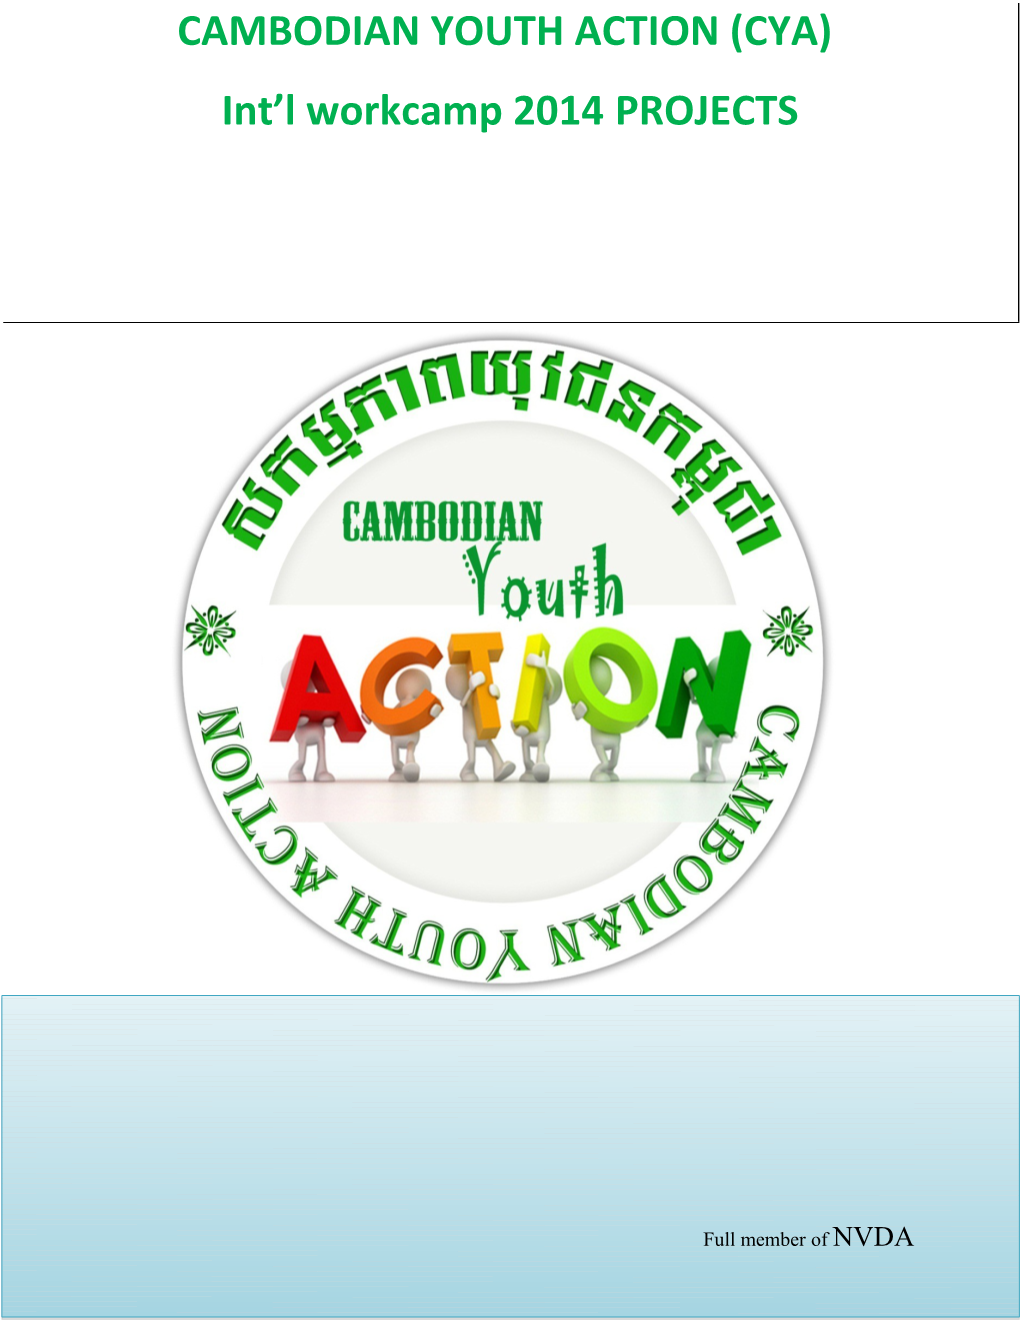 CAMBODIAN YOUTH ACTION (CYA) Is a Non-Governmental Organization Which Was Founded in 2010